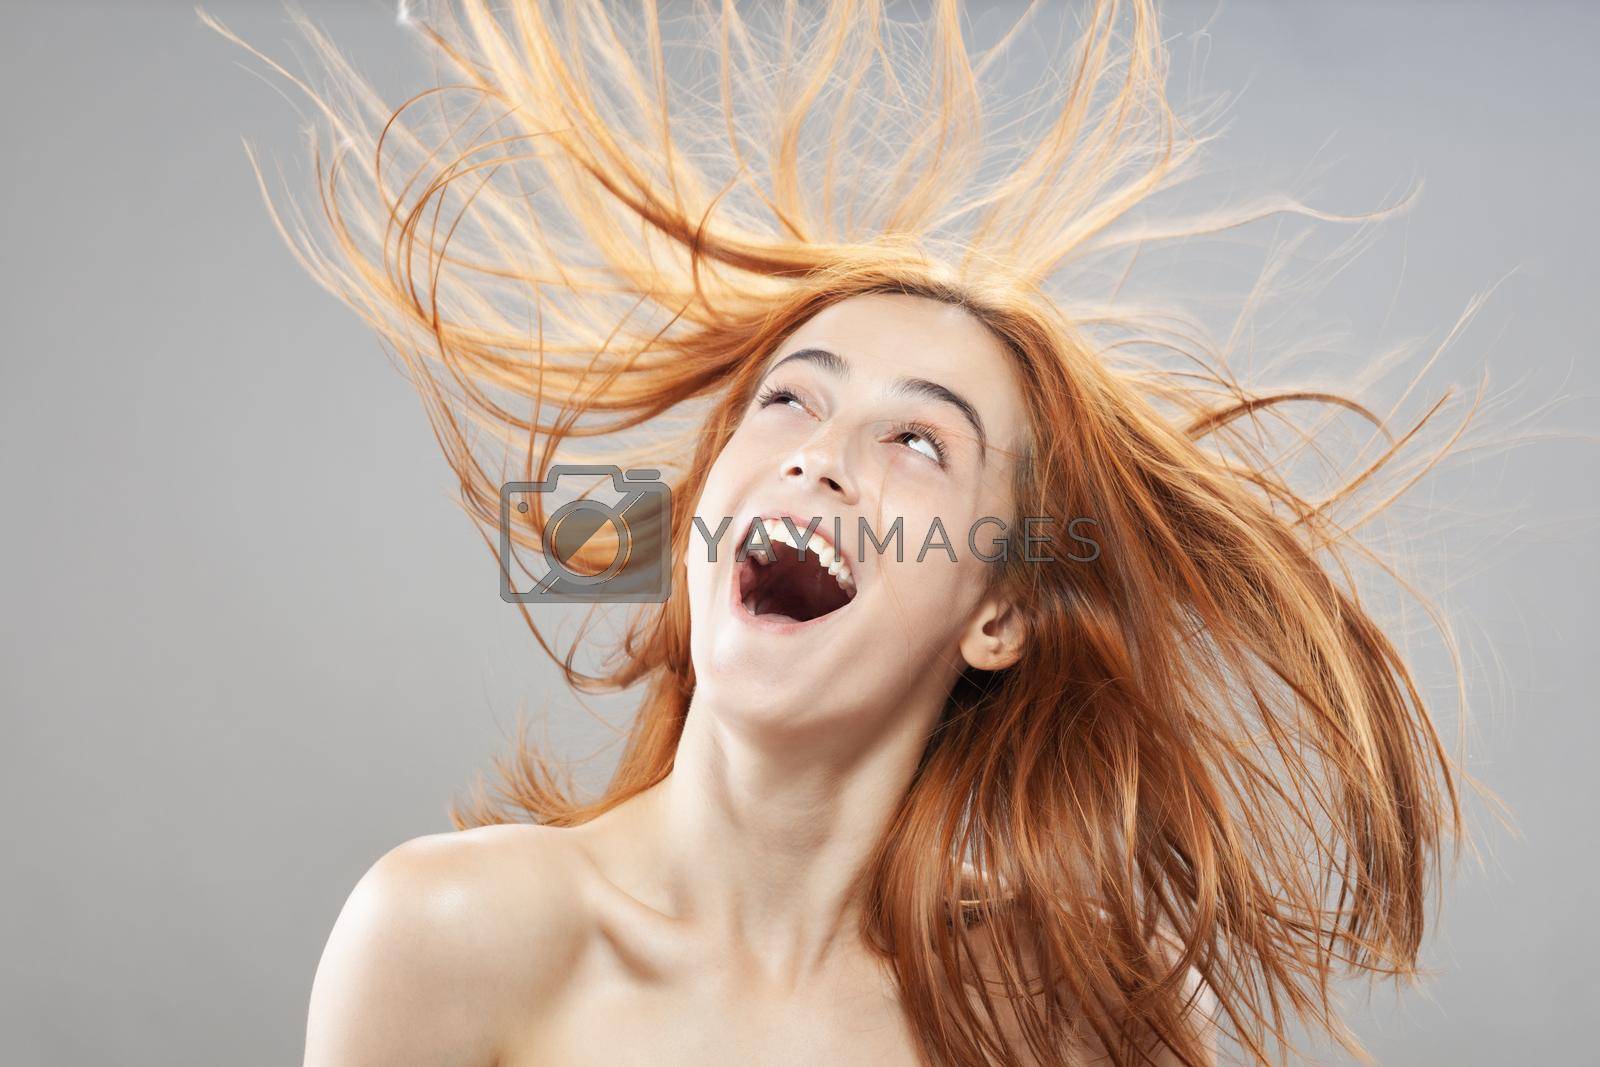 Royalty free image of Beautiful dark burnt orange windy hair girl smiling. Studio portrait with happy face expression against gray background... by kokimk